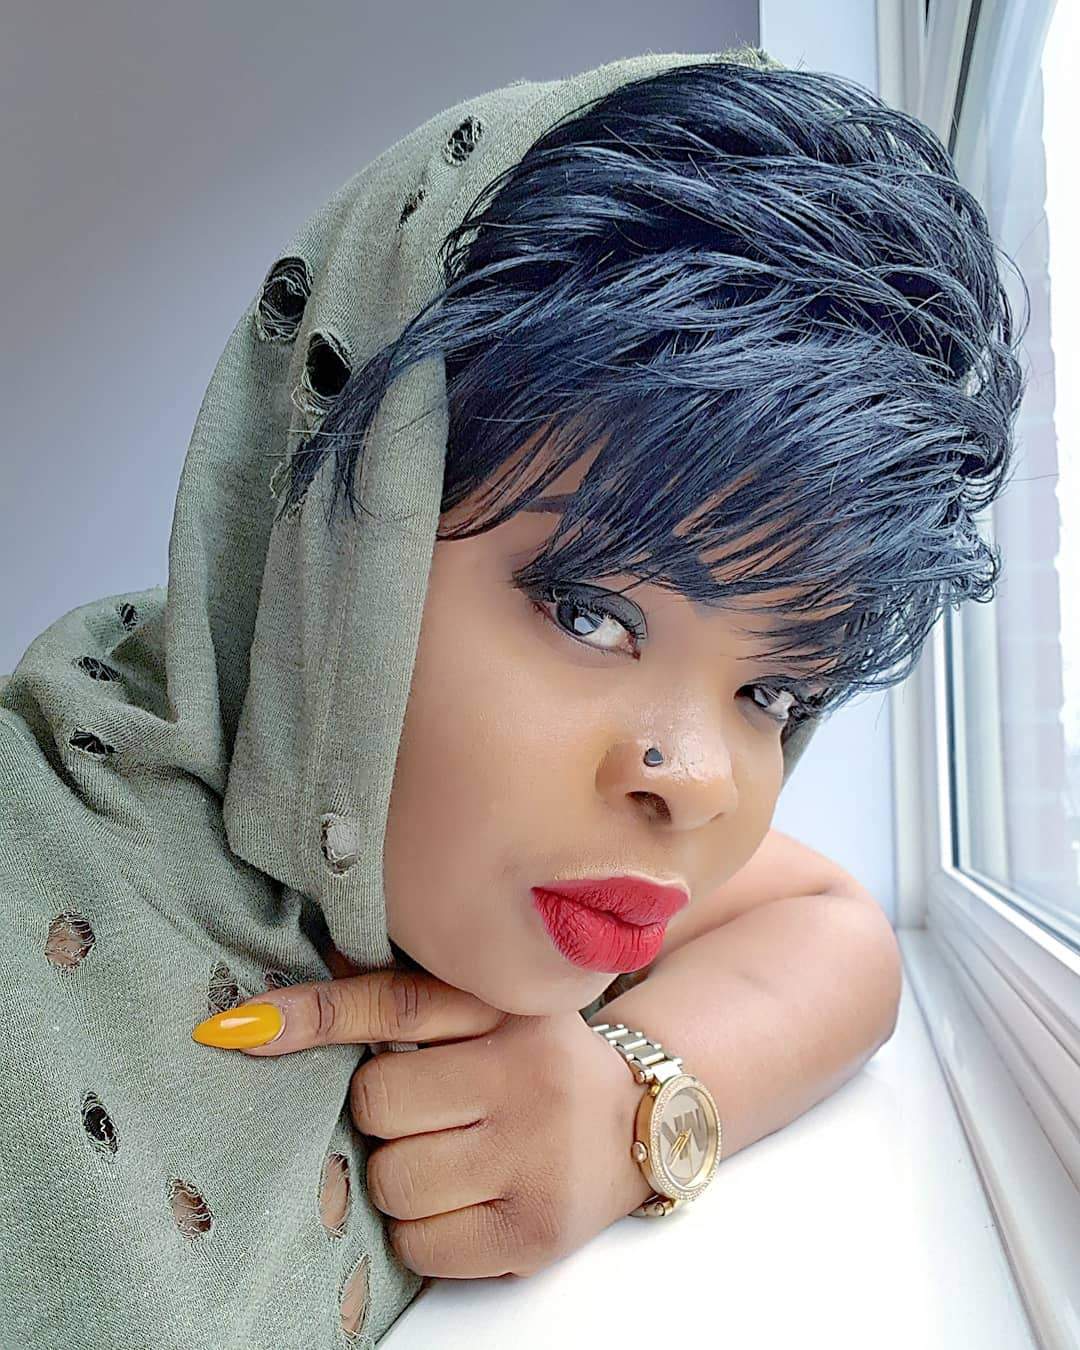 Dayo Amusa reacts after being dragged for saying she enjoys having sex